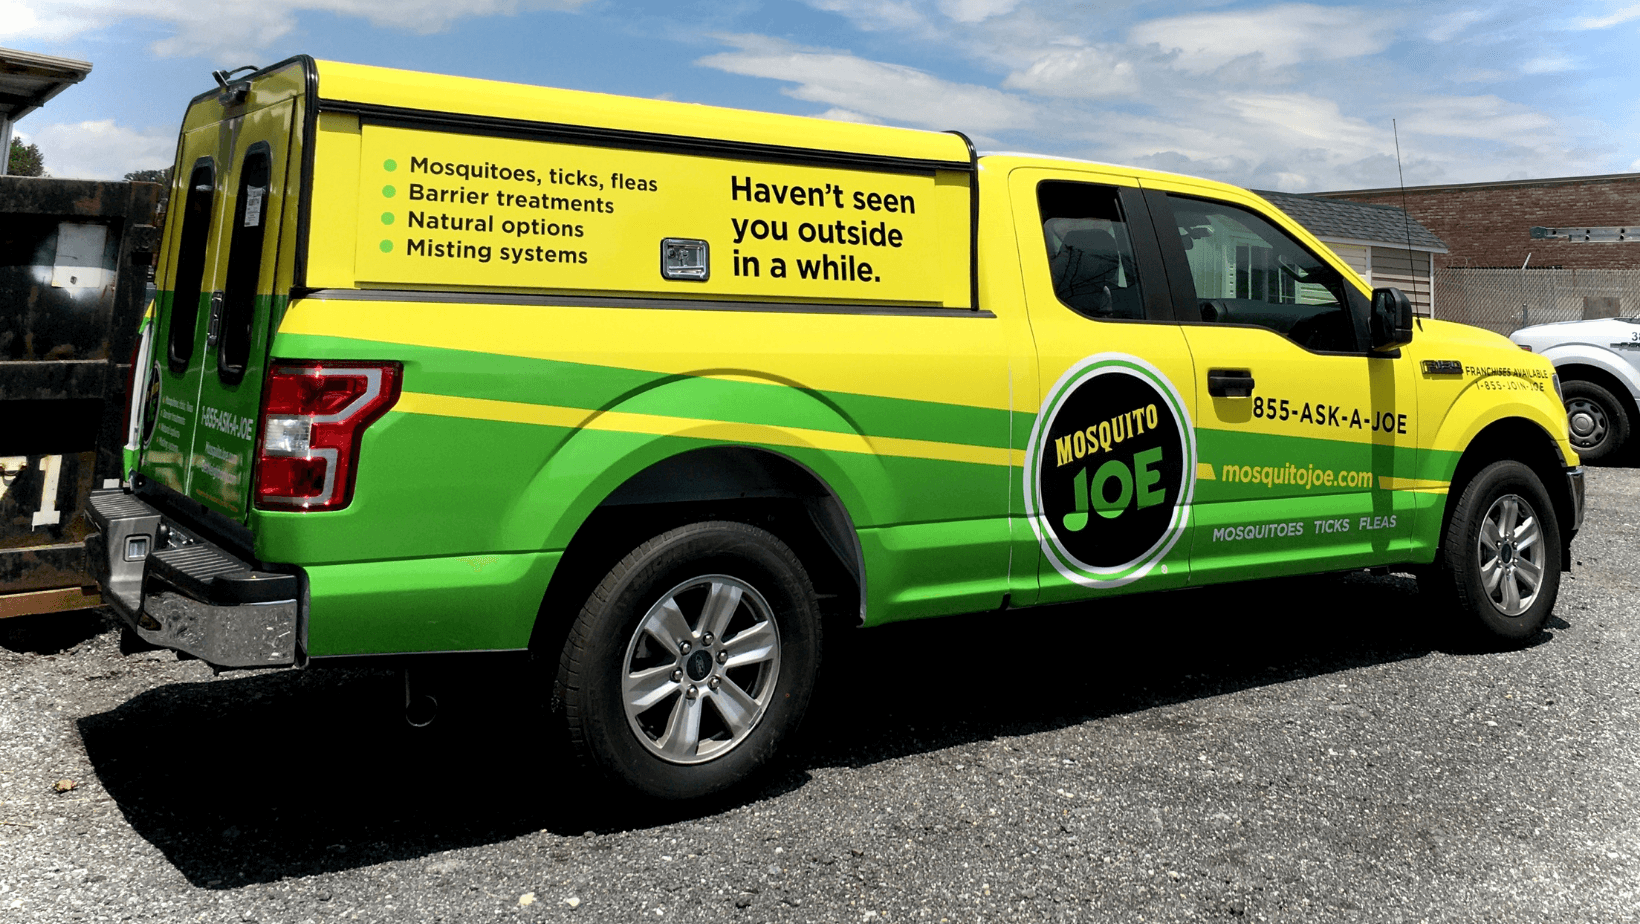 yellow-and-green-vehicle-wrap-advertising-business